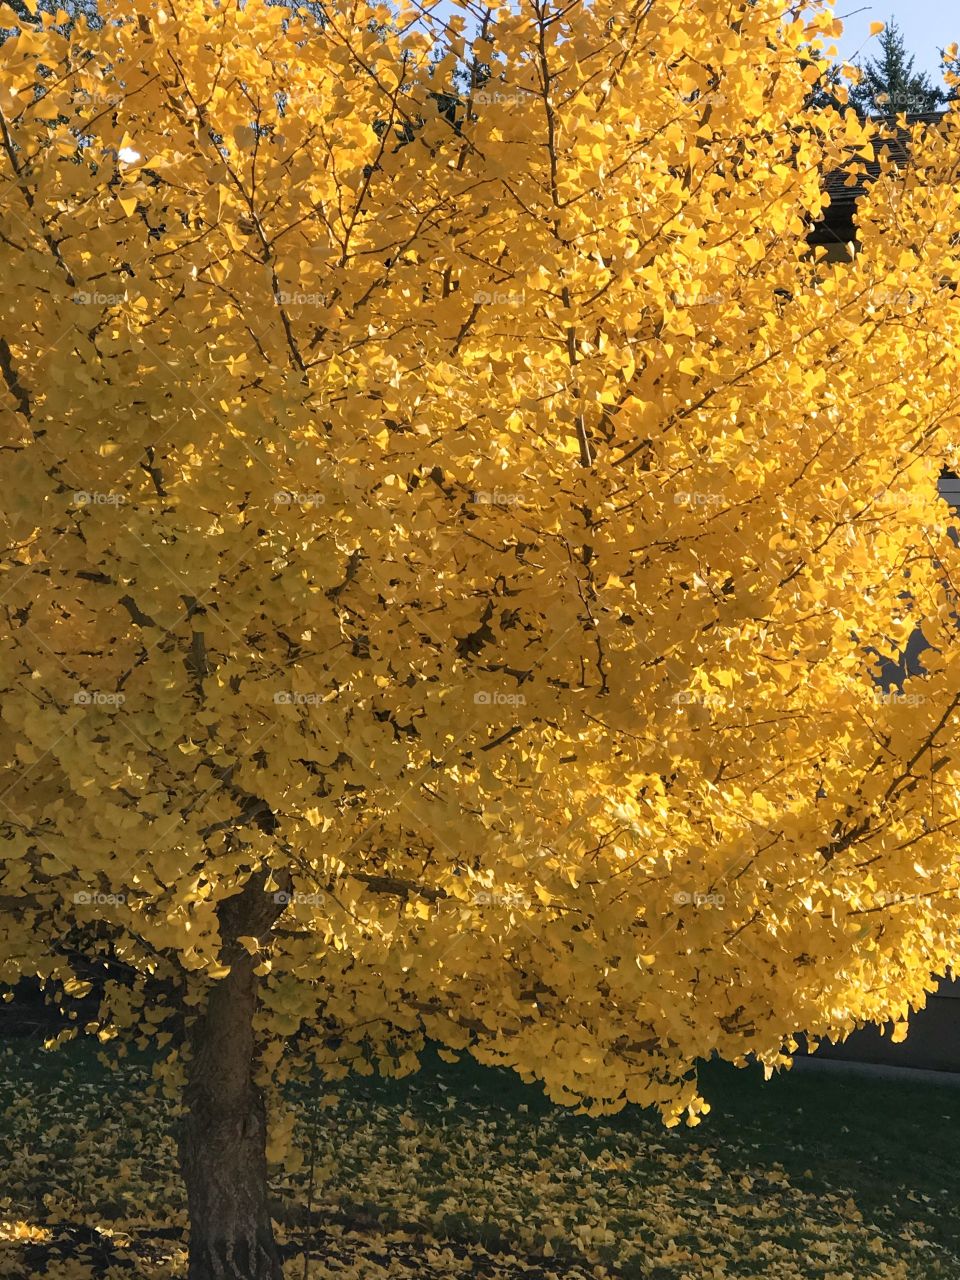 The autumn afternoon sun is already golden but when it’s rays kiss the yellow leaves of this beautiful tree the combined natural layered light sets the tree on fire! Simply spectacular! ☀️